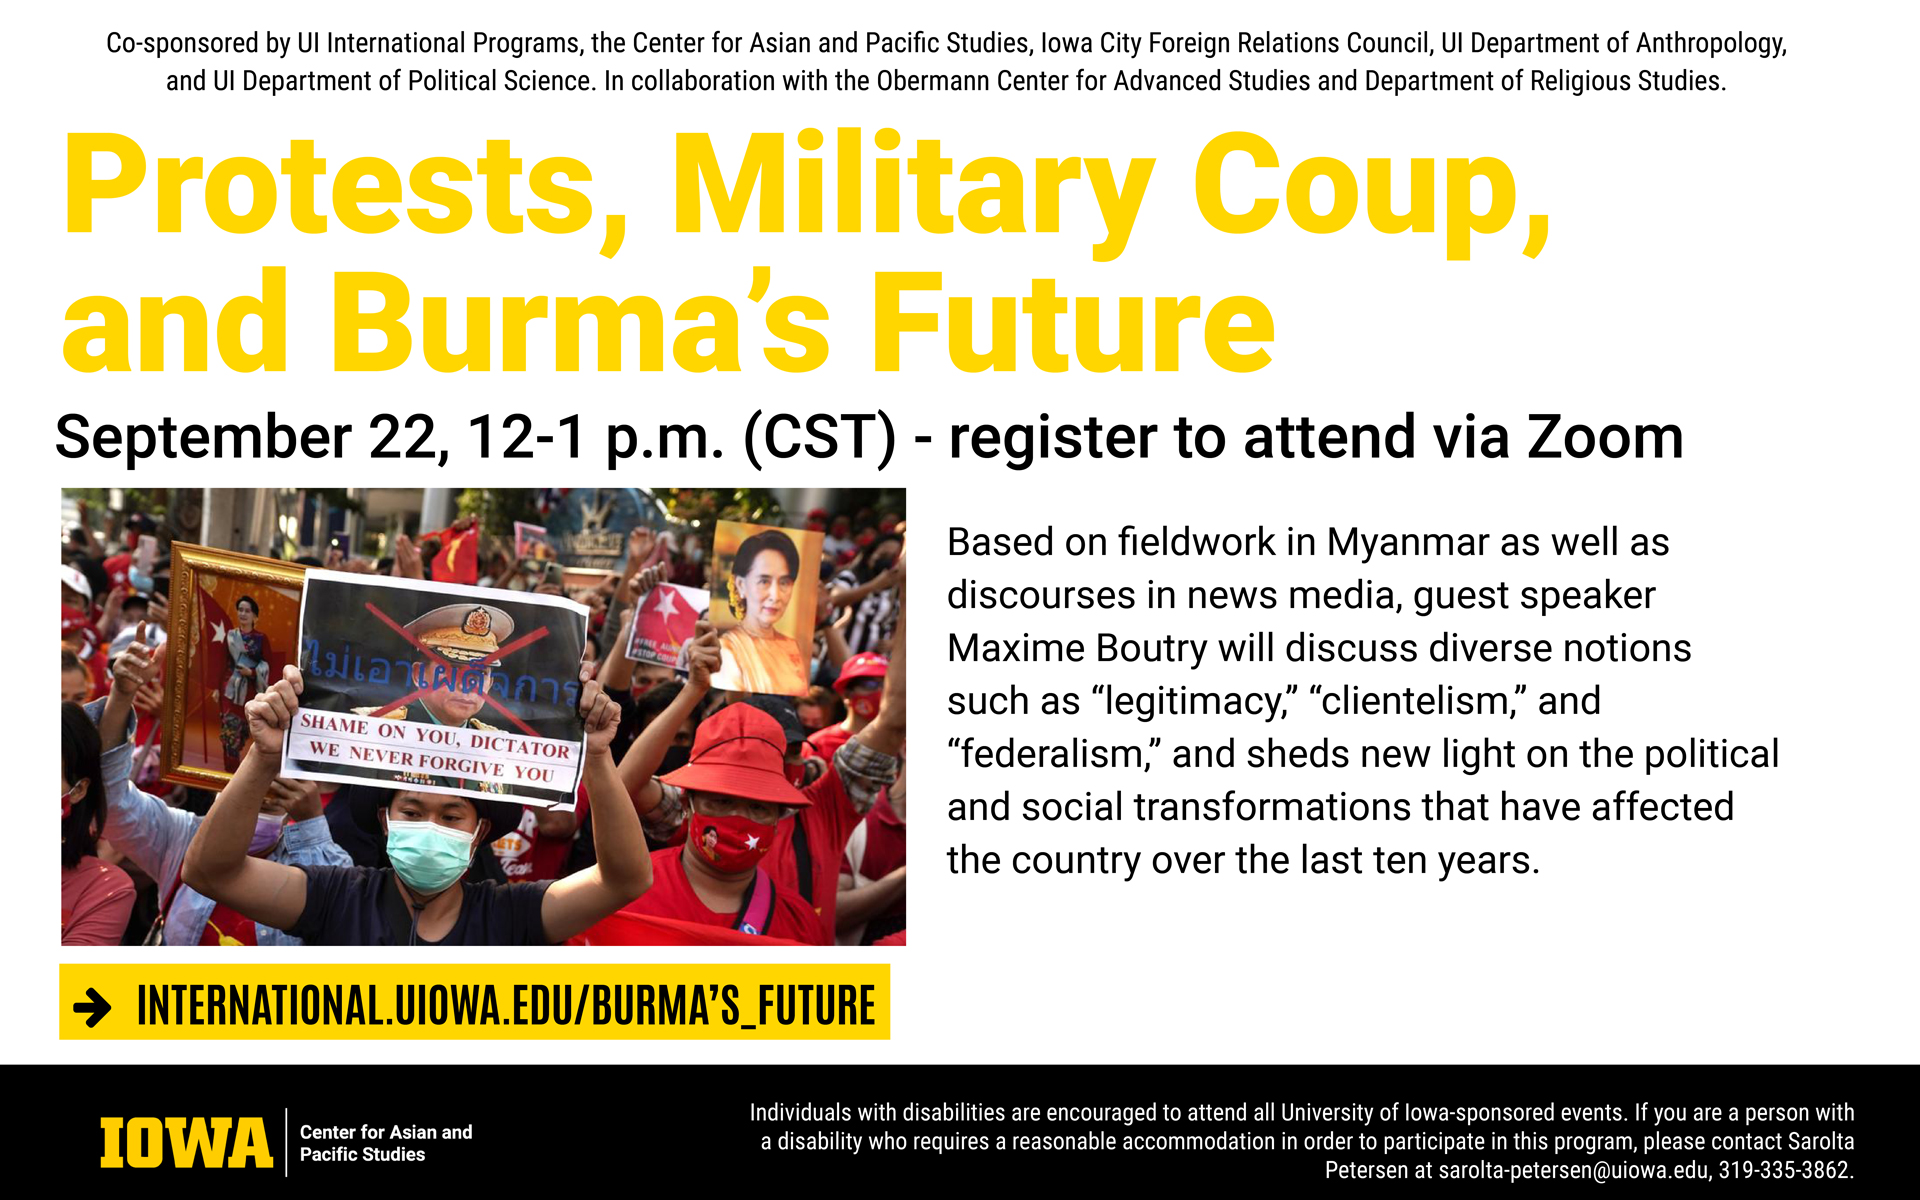 Protests, military coup and Burma's future September 22 12 to 1 pm CST register to attend via Zoom Based on fieldwork in Myanmar as well as discourses in news media, guest speaker Maxime Boutry will discuss diverse notions such as legitimacy clientelism and federalism and sheds new light on the political and social transformations that have affected the country over the last ten years visit international.uiowa.edu/burma's_future for more